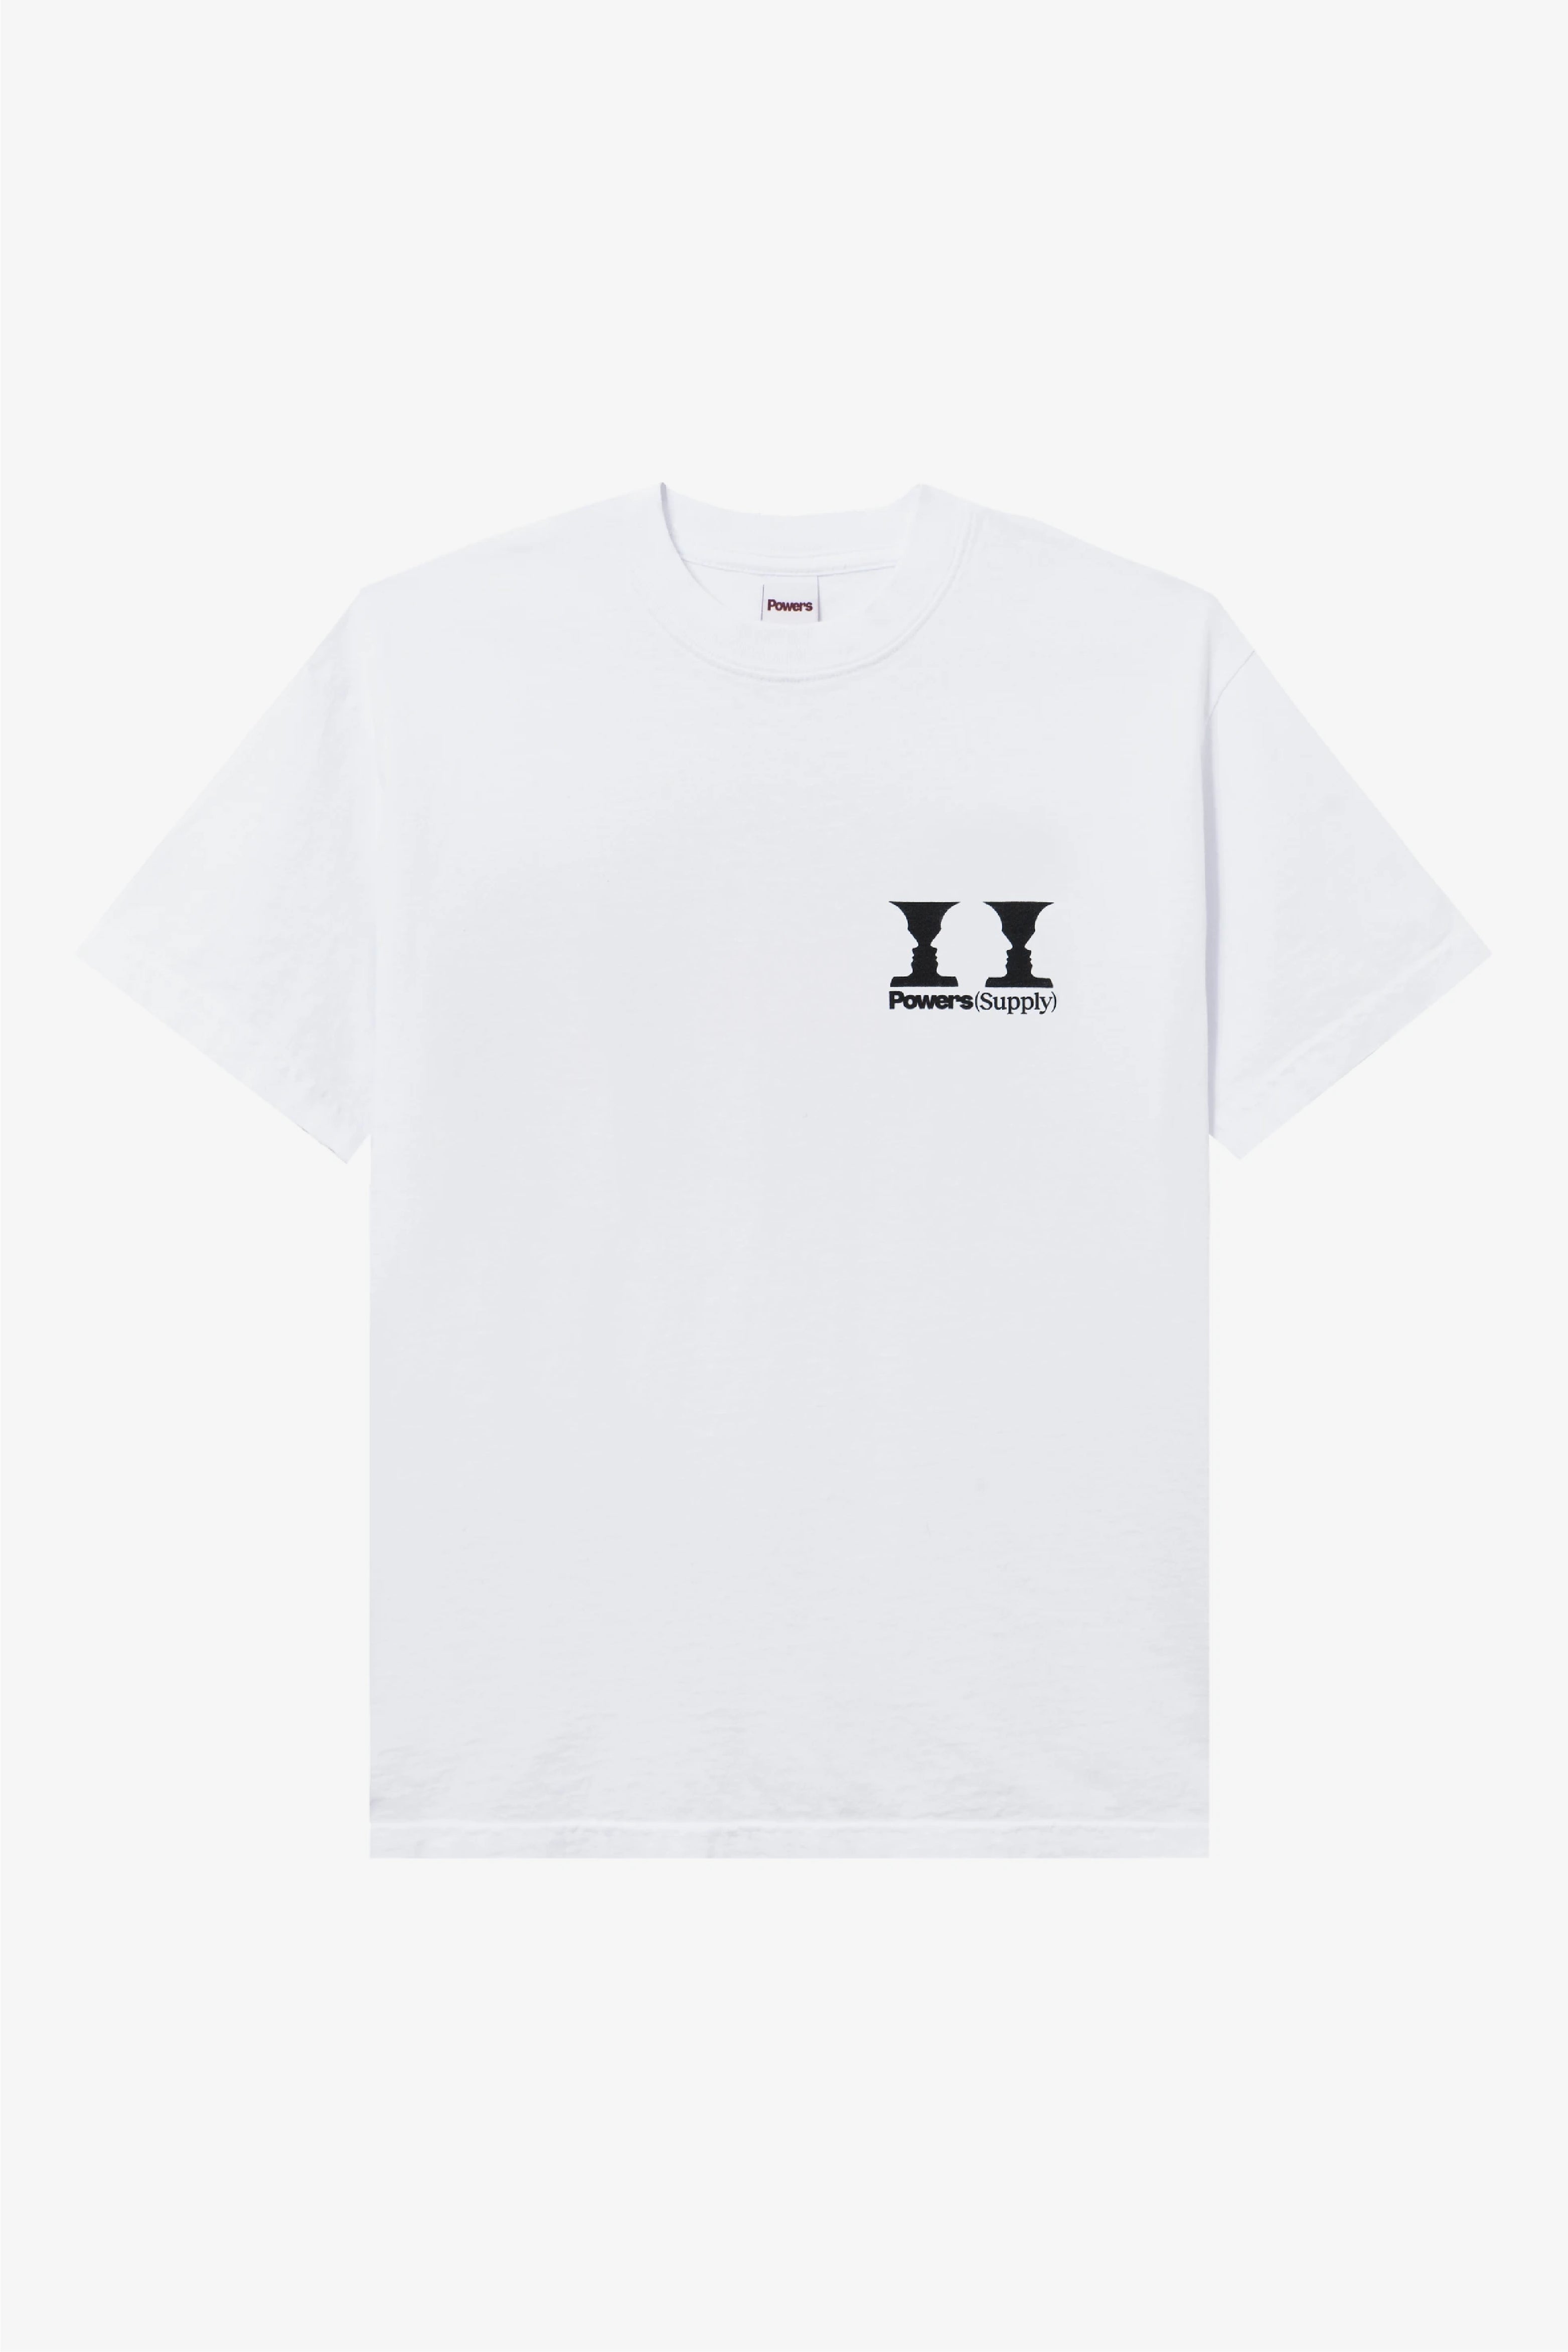 Selectshop FRAME - POWERS SUPPLY Ultimate Relaxation SS Tee T-Shirts Dubai